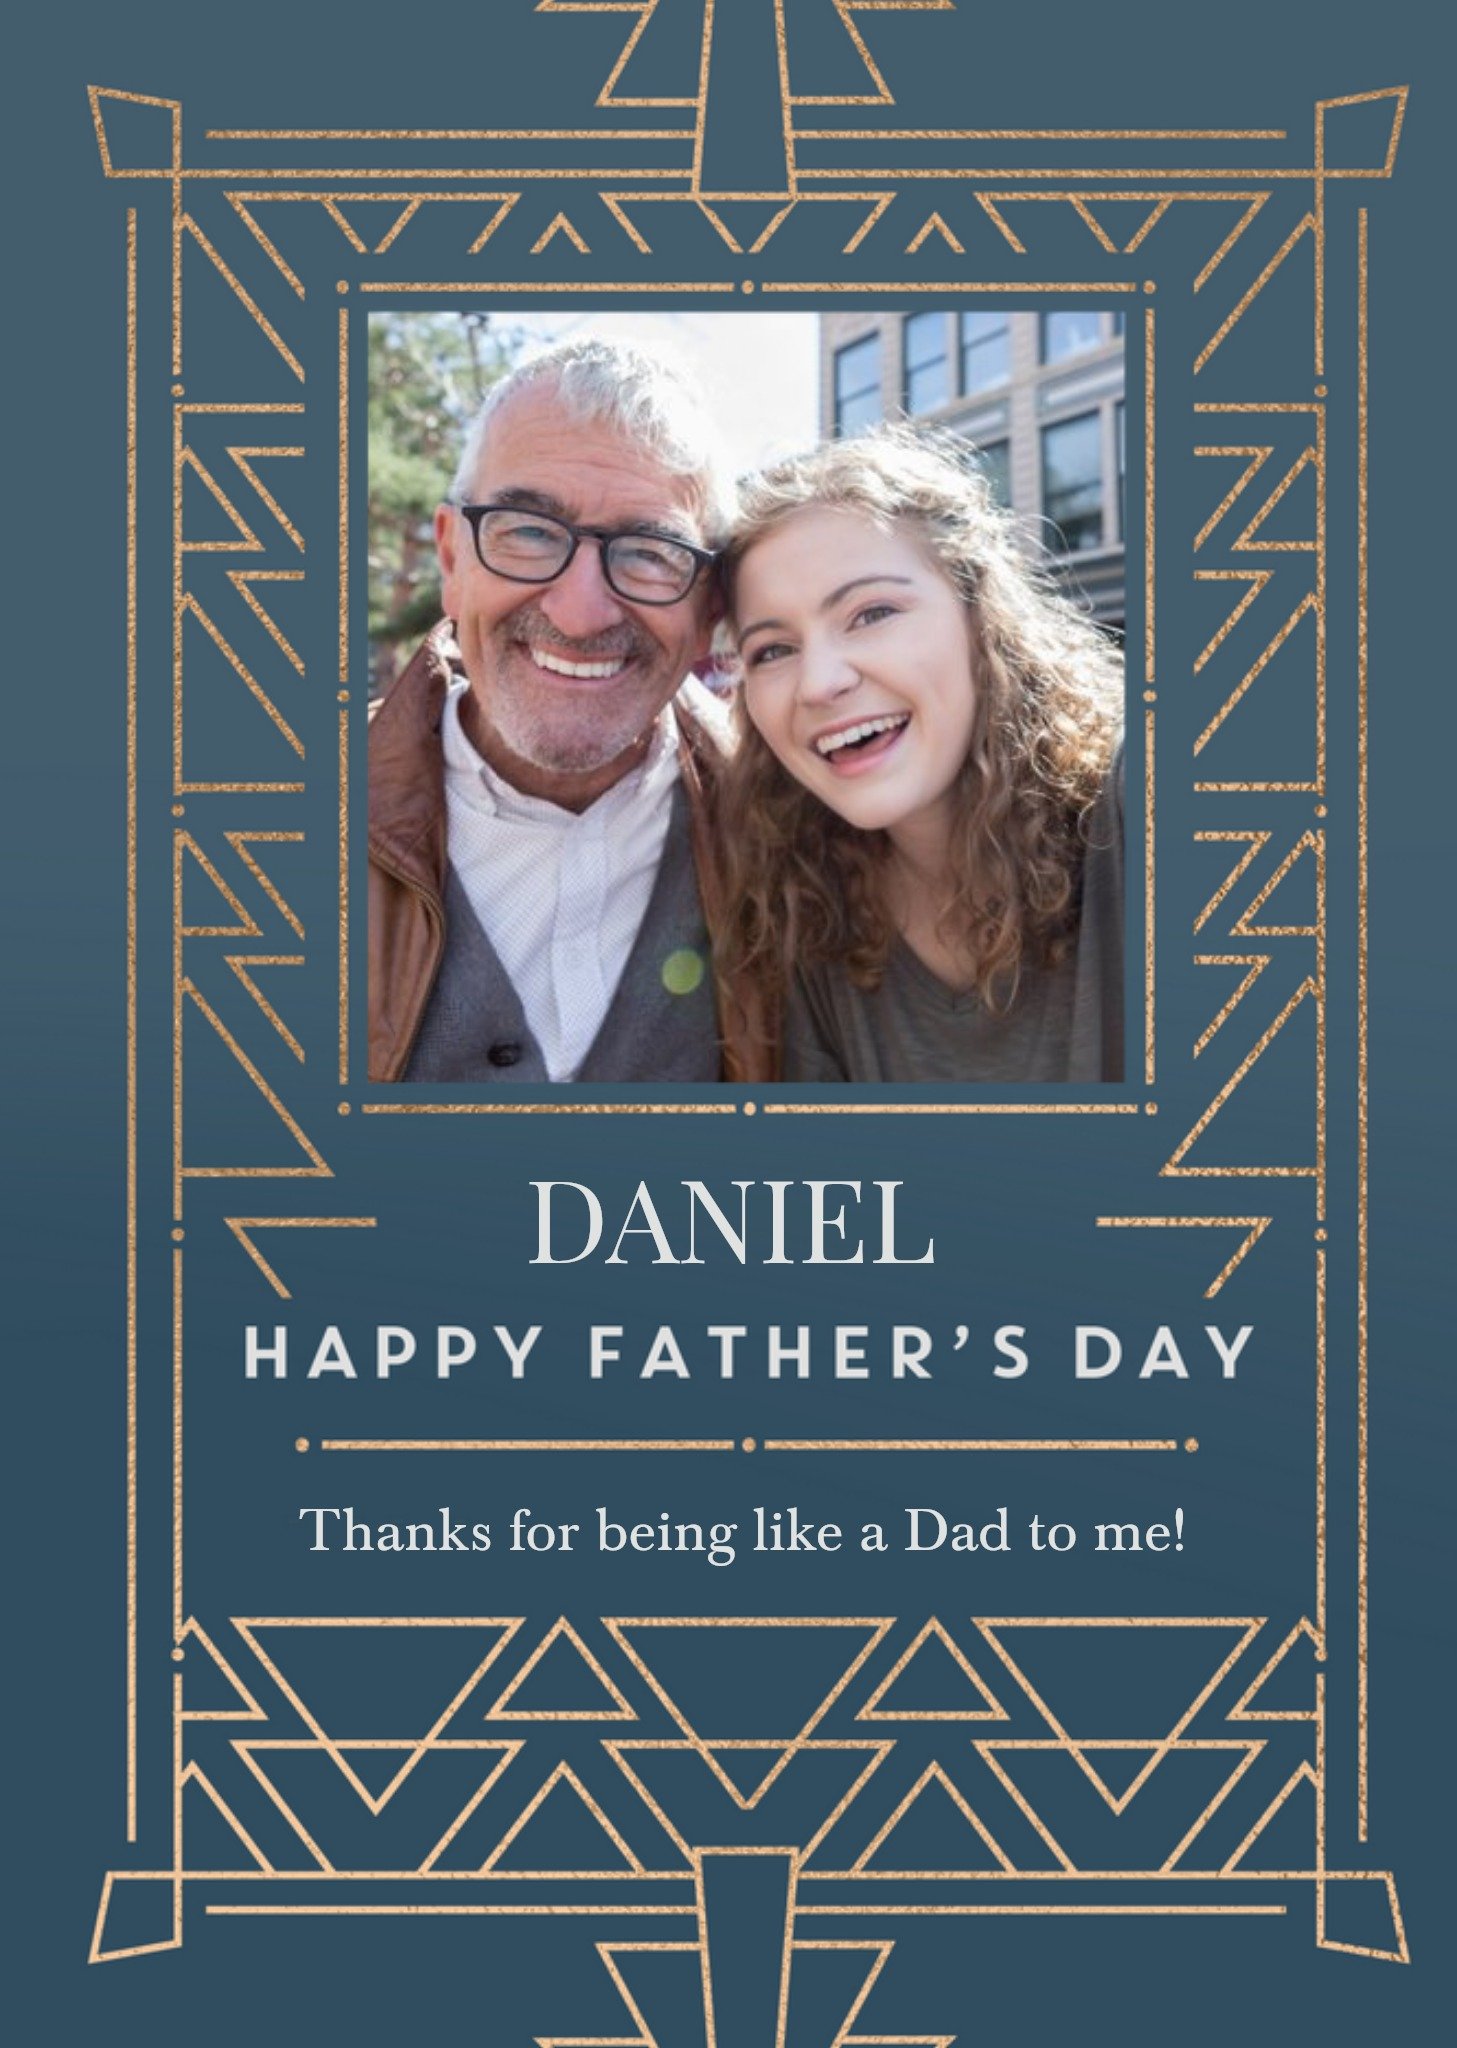 Moonpig Art Deco Photo Upload Like A Dad Father's Day Card Ecard